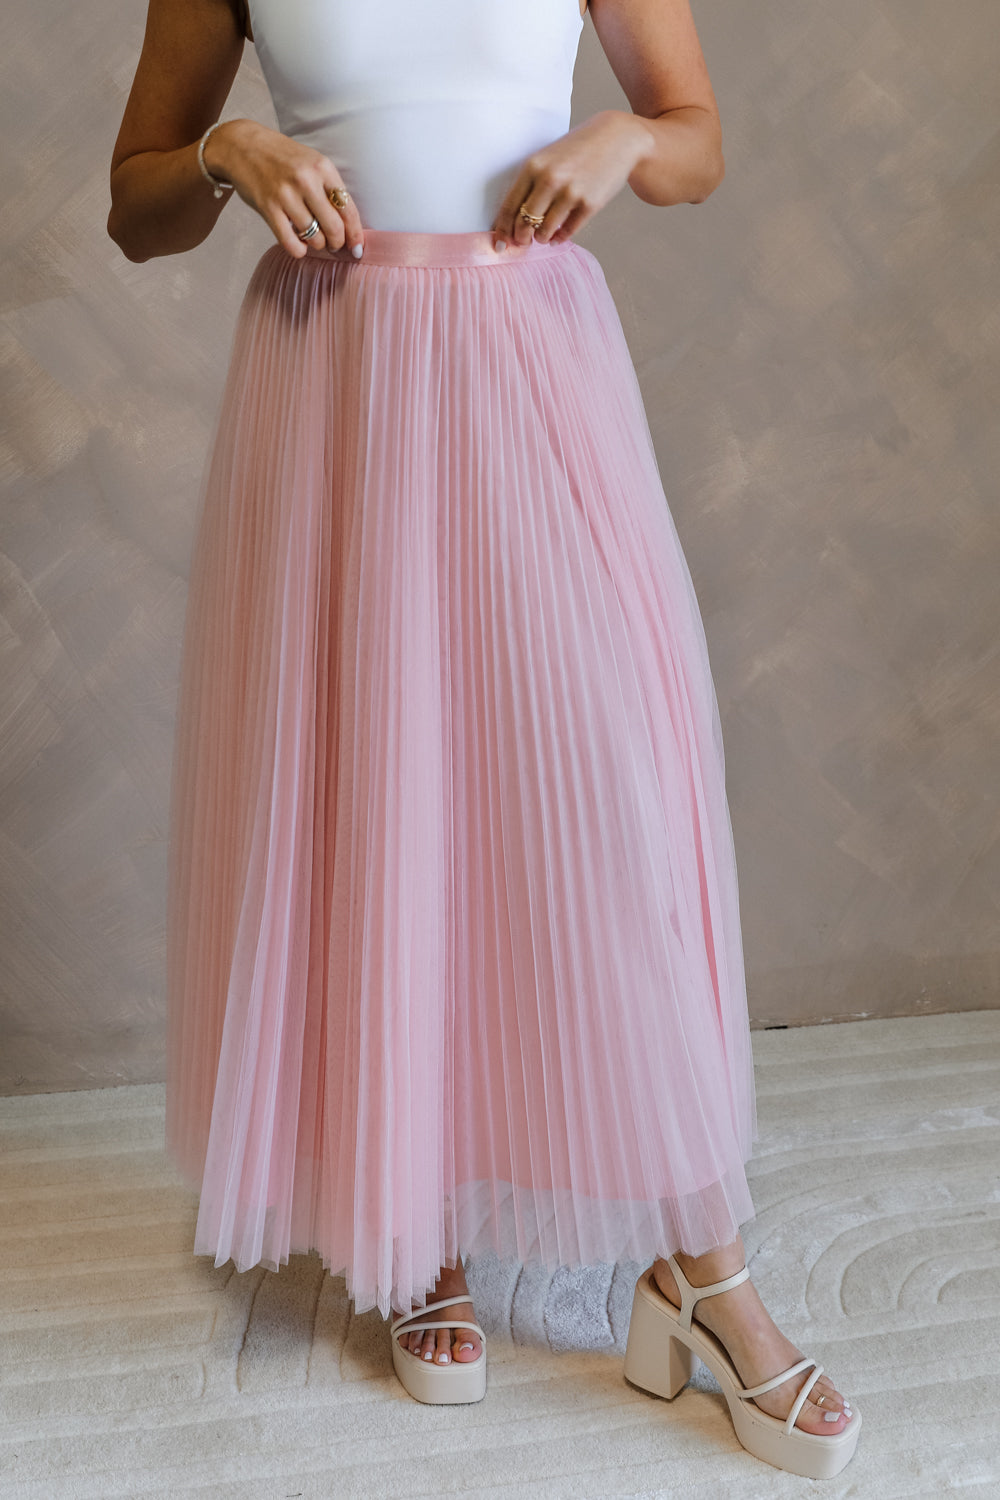 Front view of female model wearing the Adele Dusty Pink Pleated Tulle Midi Skirt which features Dusty Pink Tulle Pleated Fabric, Dusty Pink Lining, Midi Length and Satin Elastic Band